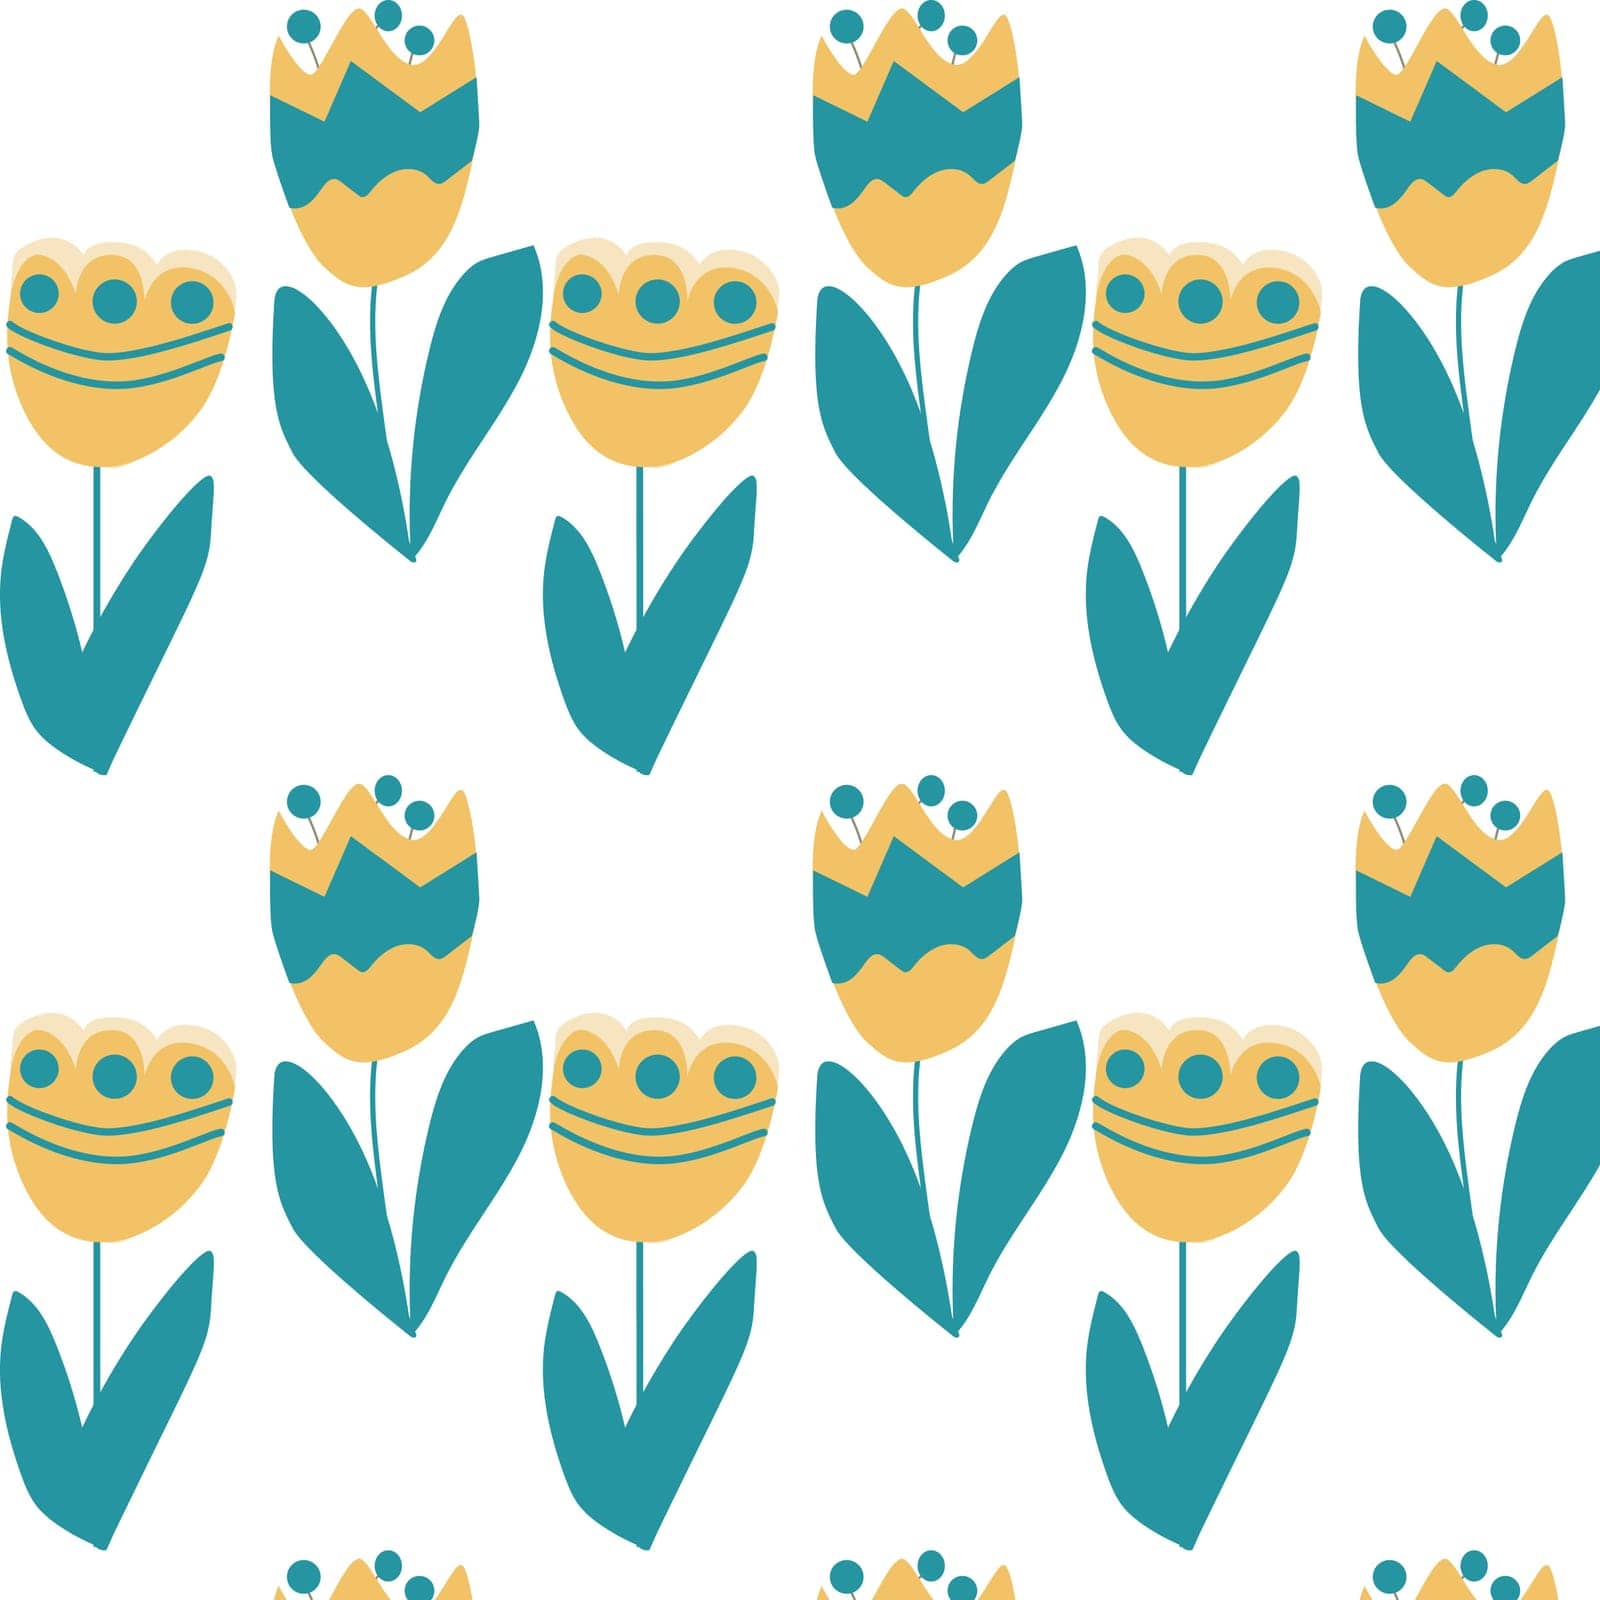 folklore style pattern with stylized yellow blue flowers. Vector illustration